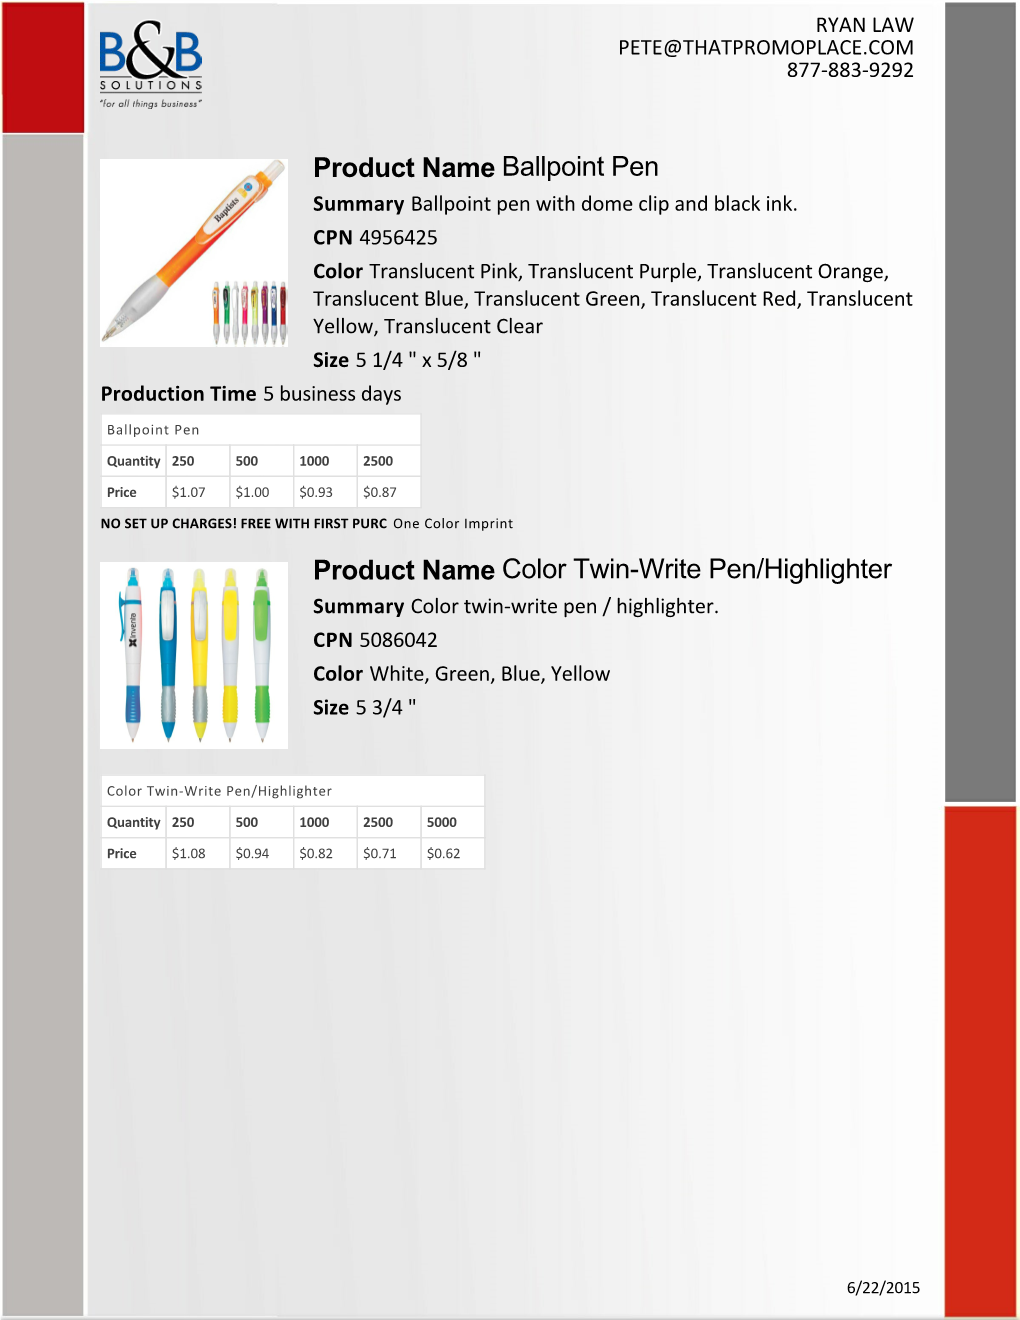 Product Name Product Name Ballpoint Pen Color Twin-Write Pen